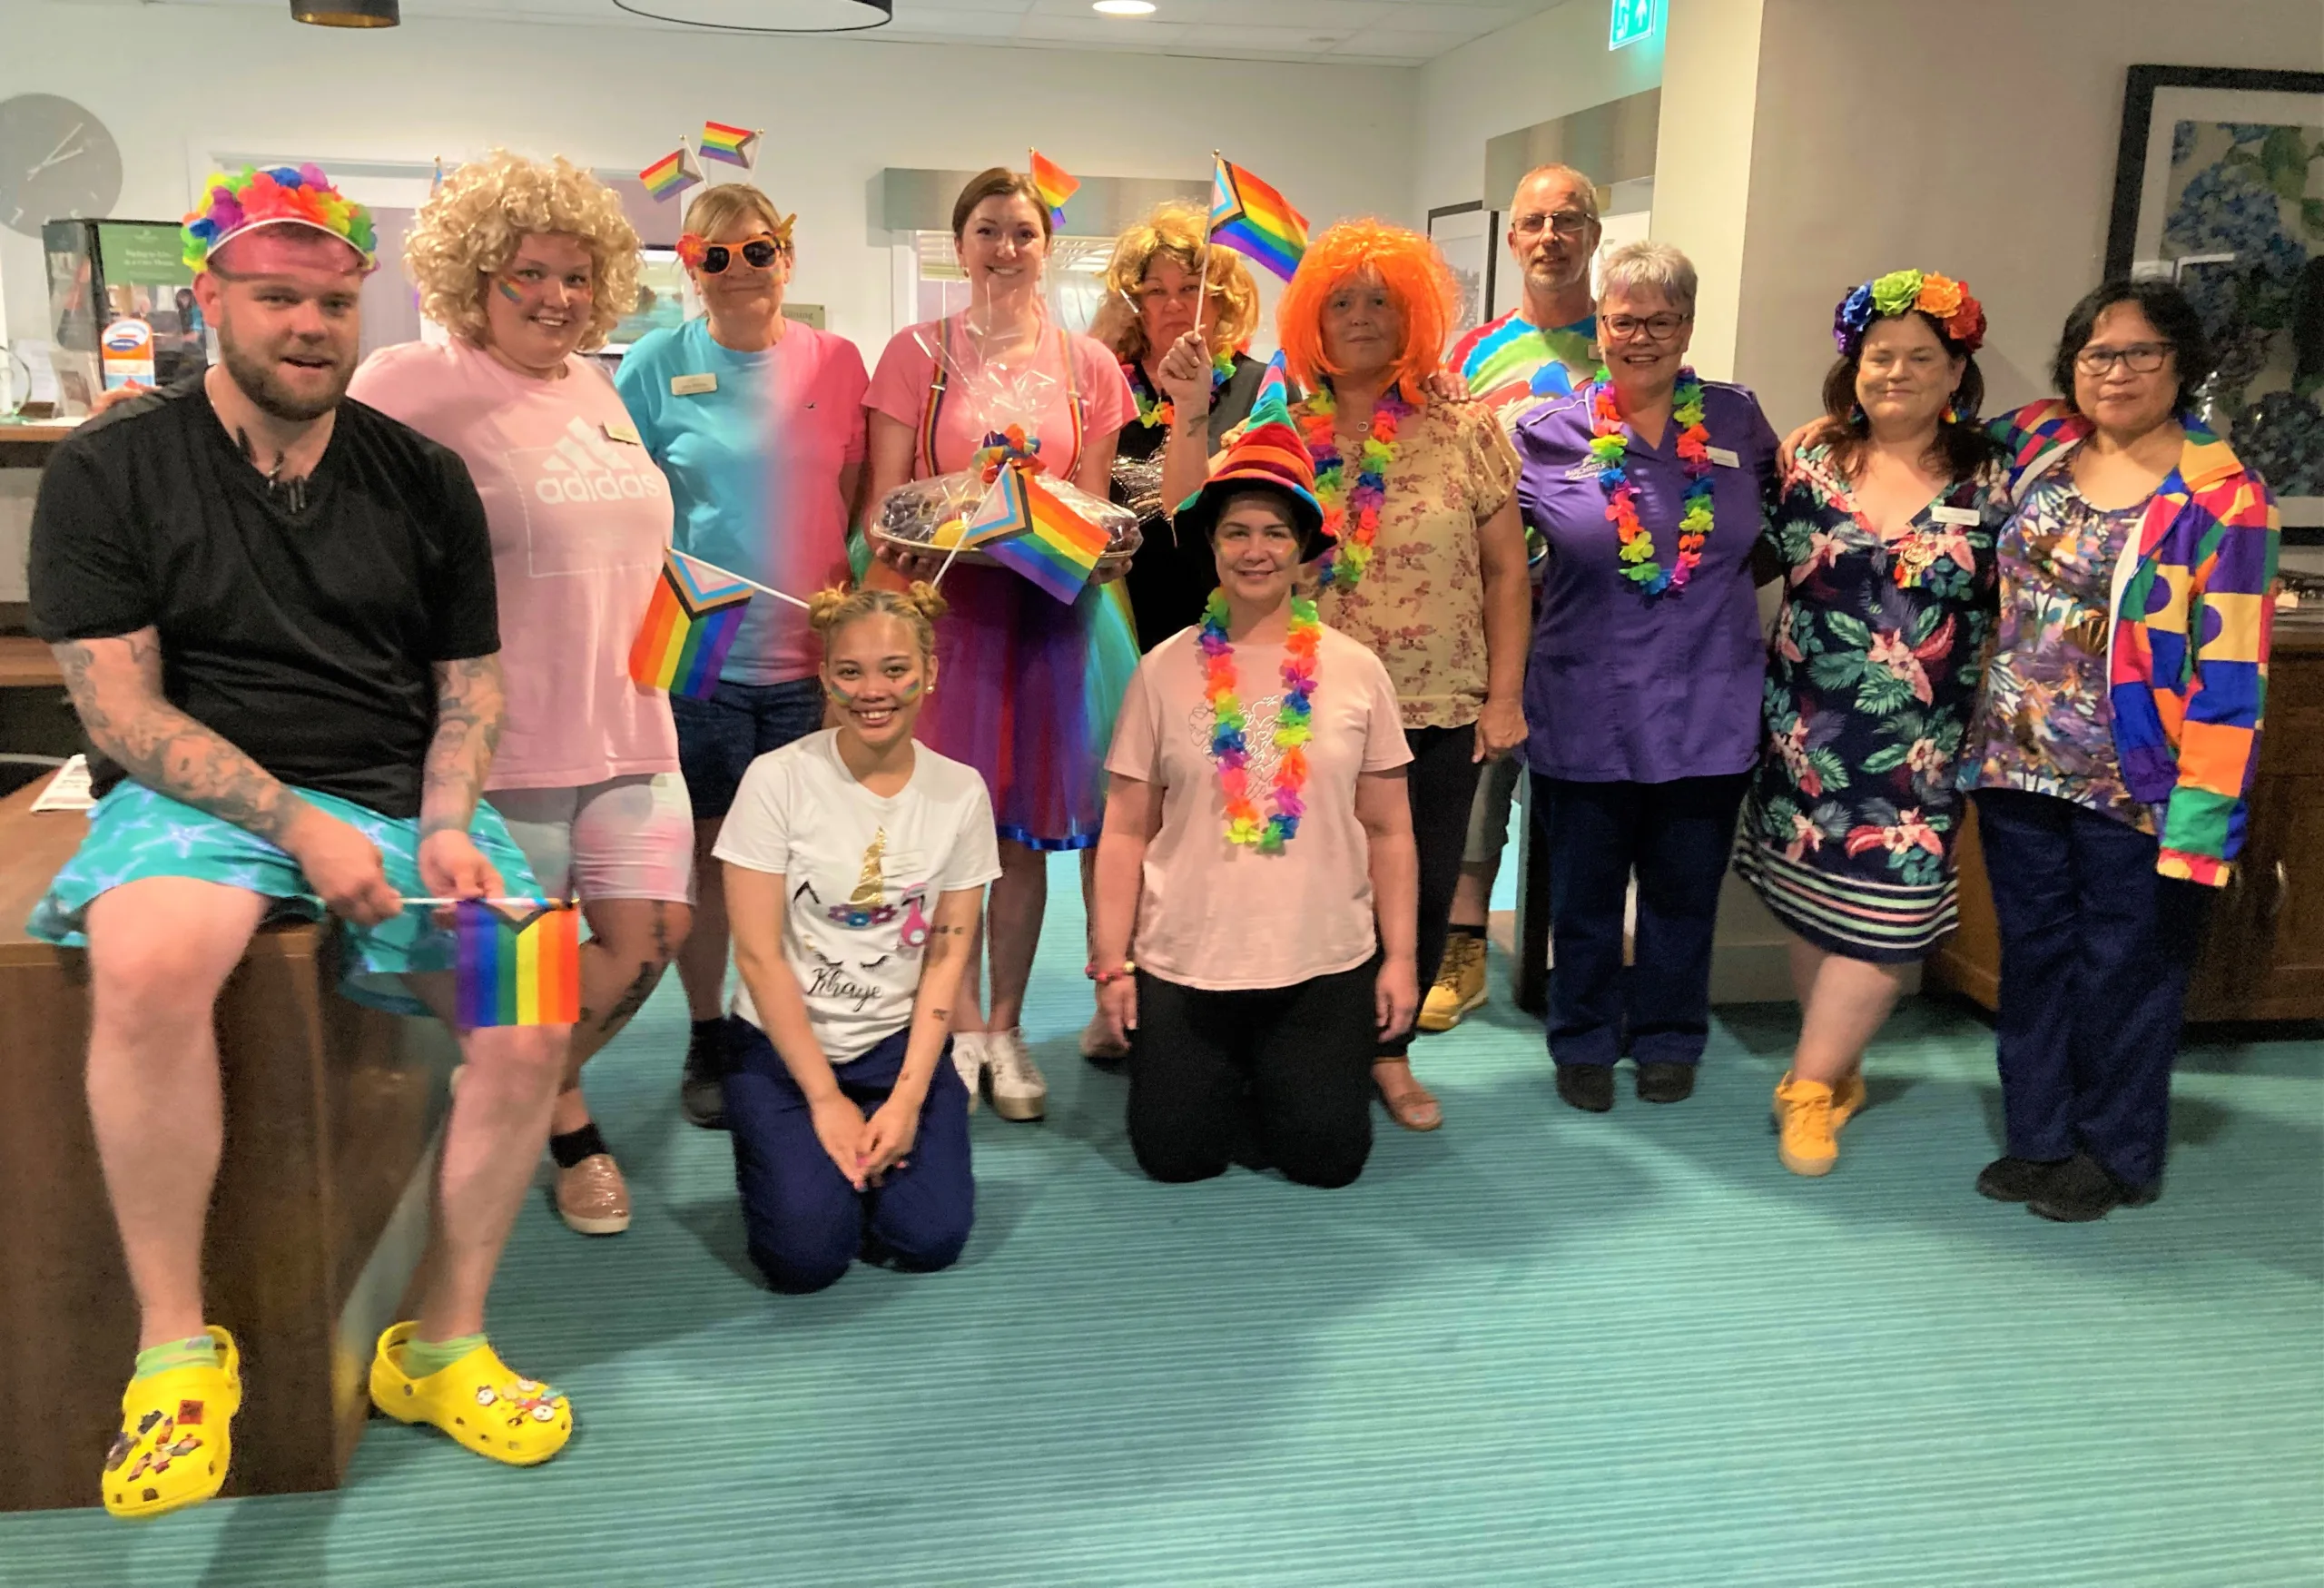 This June, staff and residents at Rose Lodge care home in Wisbech have been creating decorations, decorating their home with rainbows and enjoying the colourful celebrations from around the world